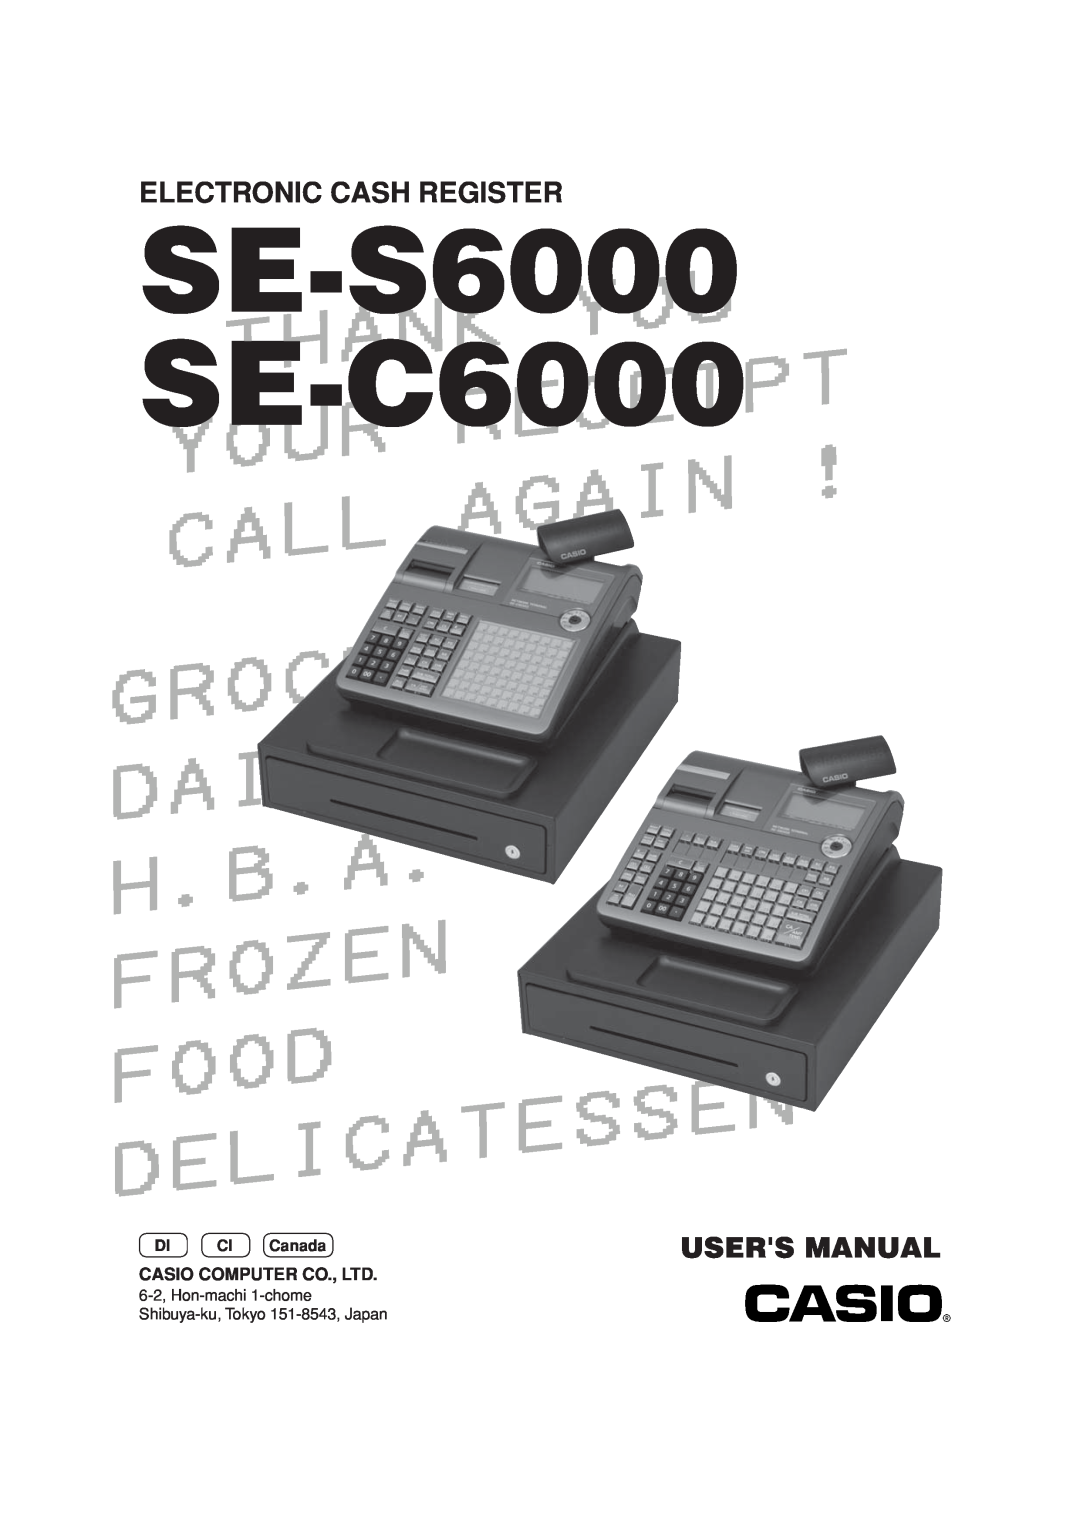 Casio SE-S6000 user manual SE-C6000, Thank, Your, Receipt, Again, Call, Grocery, Dairy, Frozen, Food, Delicatessen 